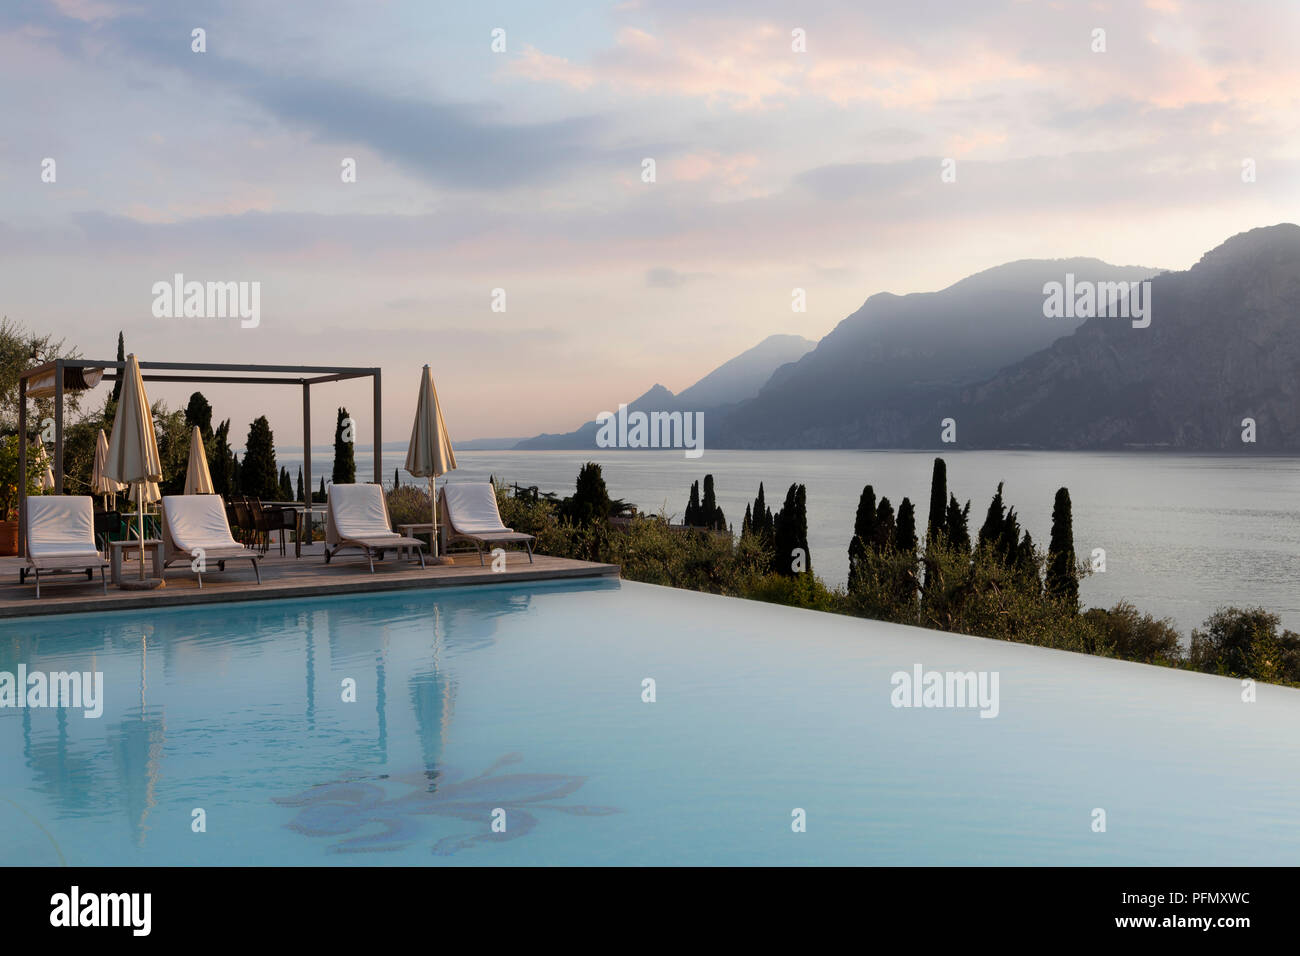 outdoor swimming pool at luxury hotel at sunset with lake and mountains Stock Photo